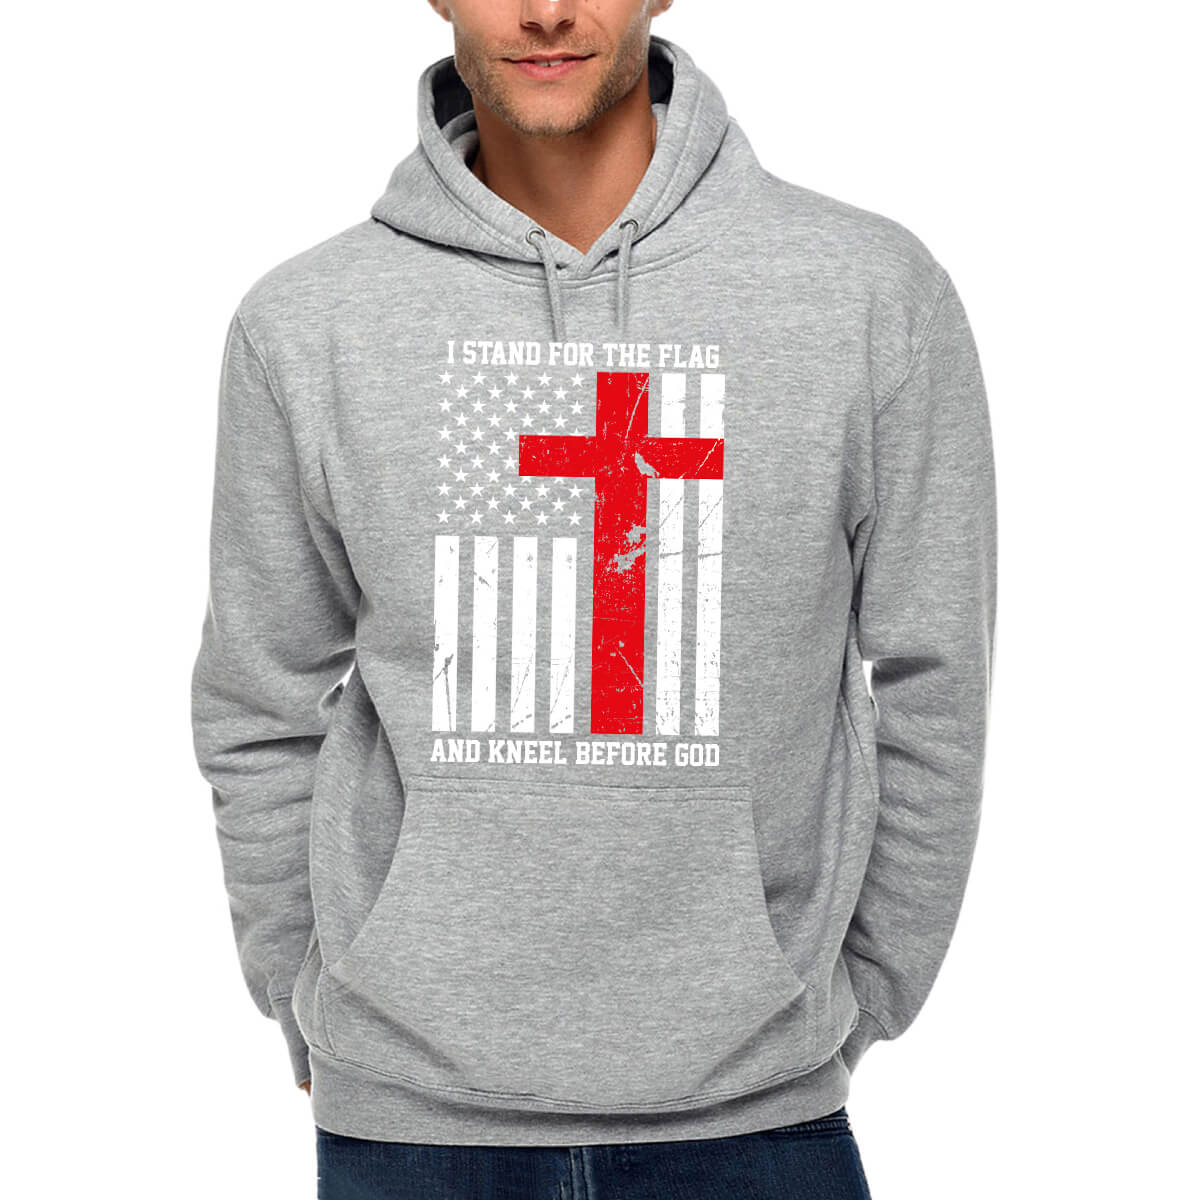 I Stand For The Flag And Kneel Before God Men's Sweatshirt Hoodie